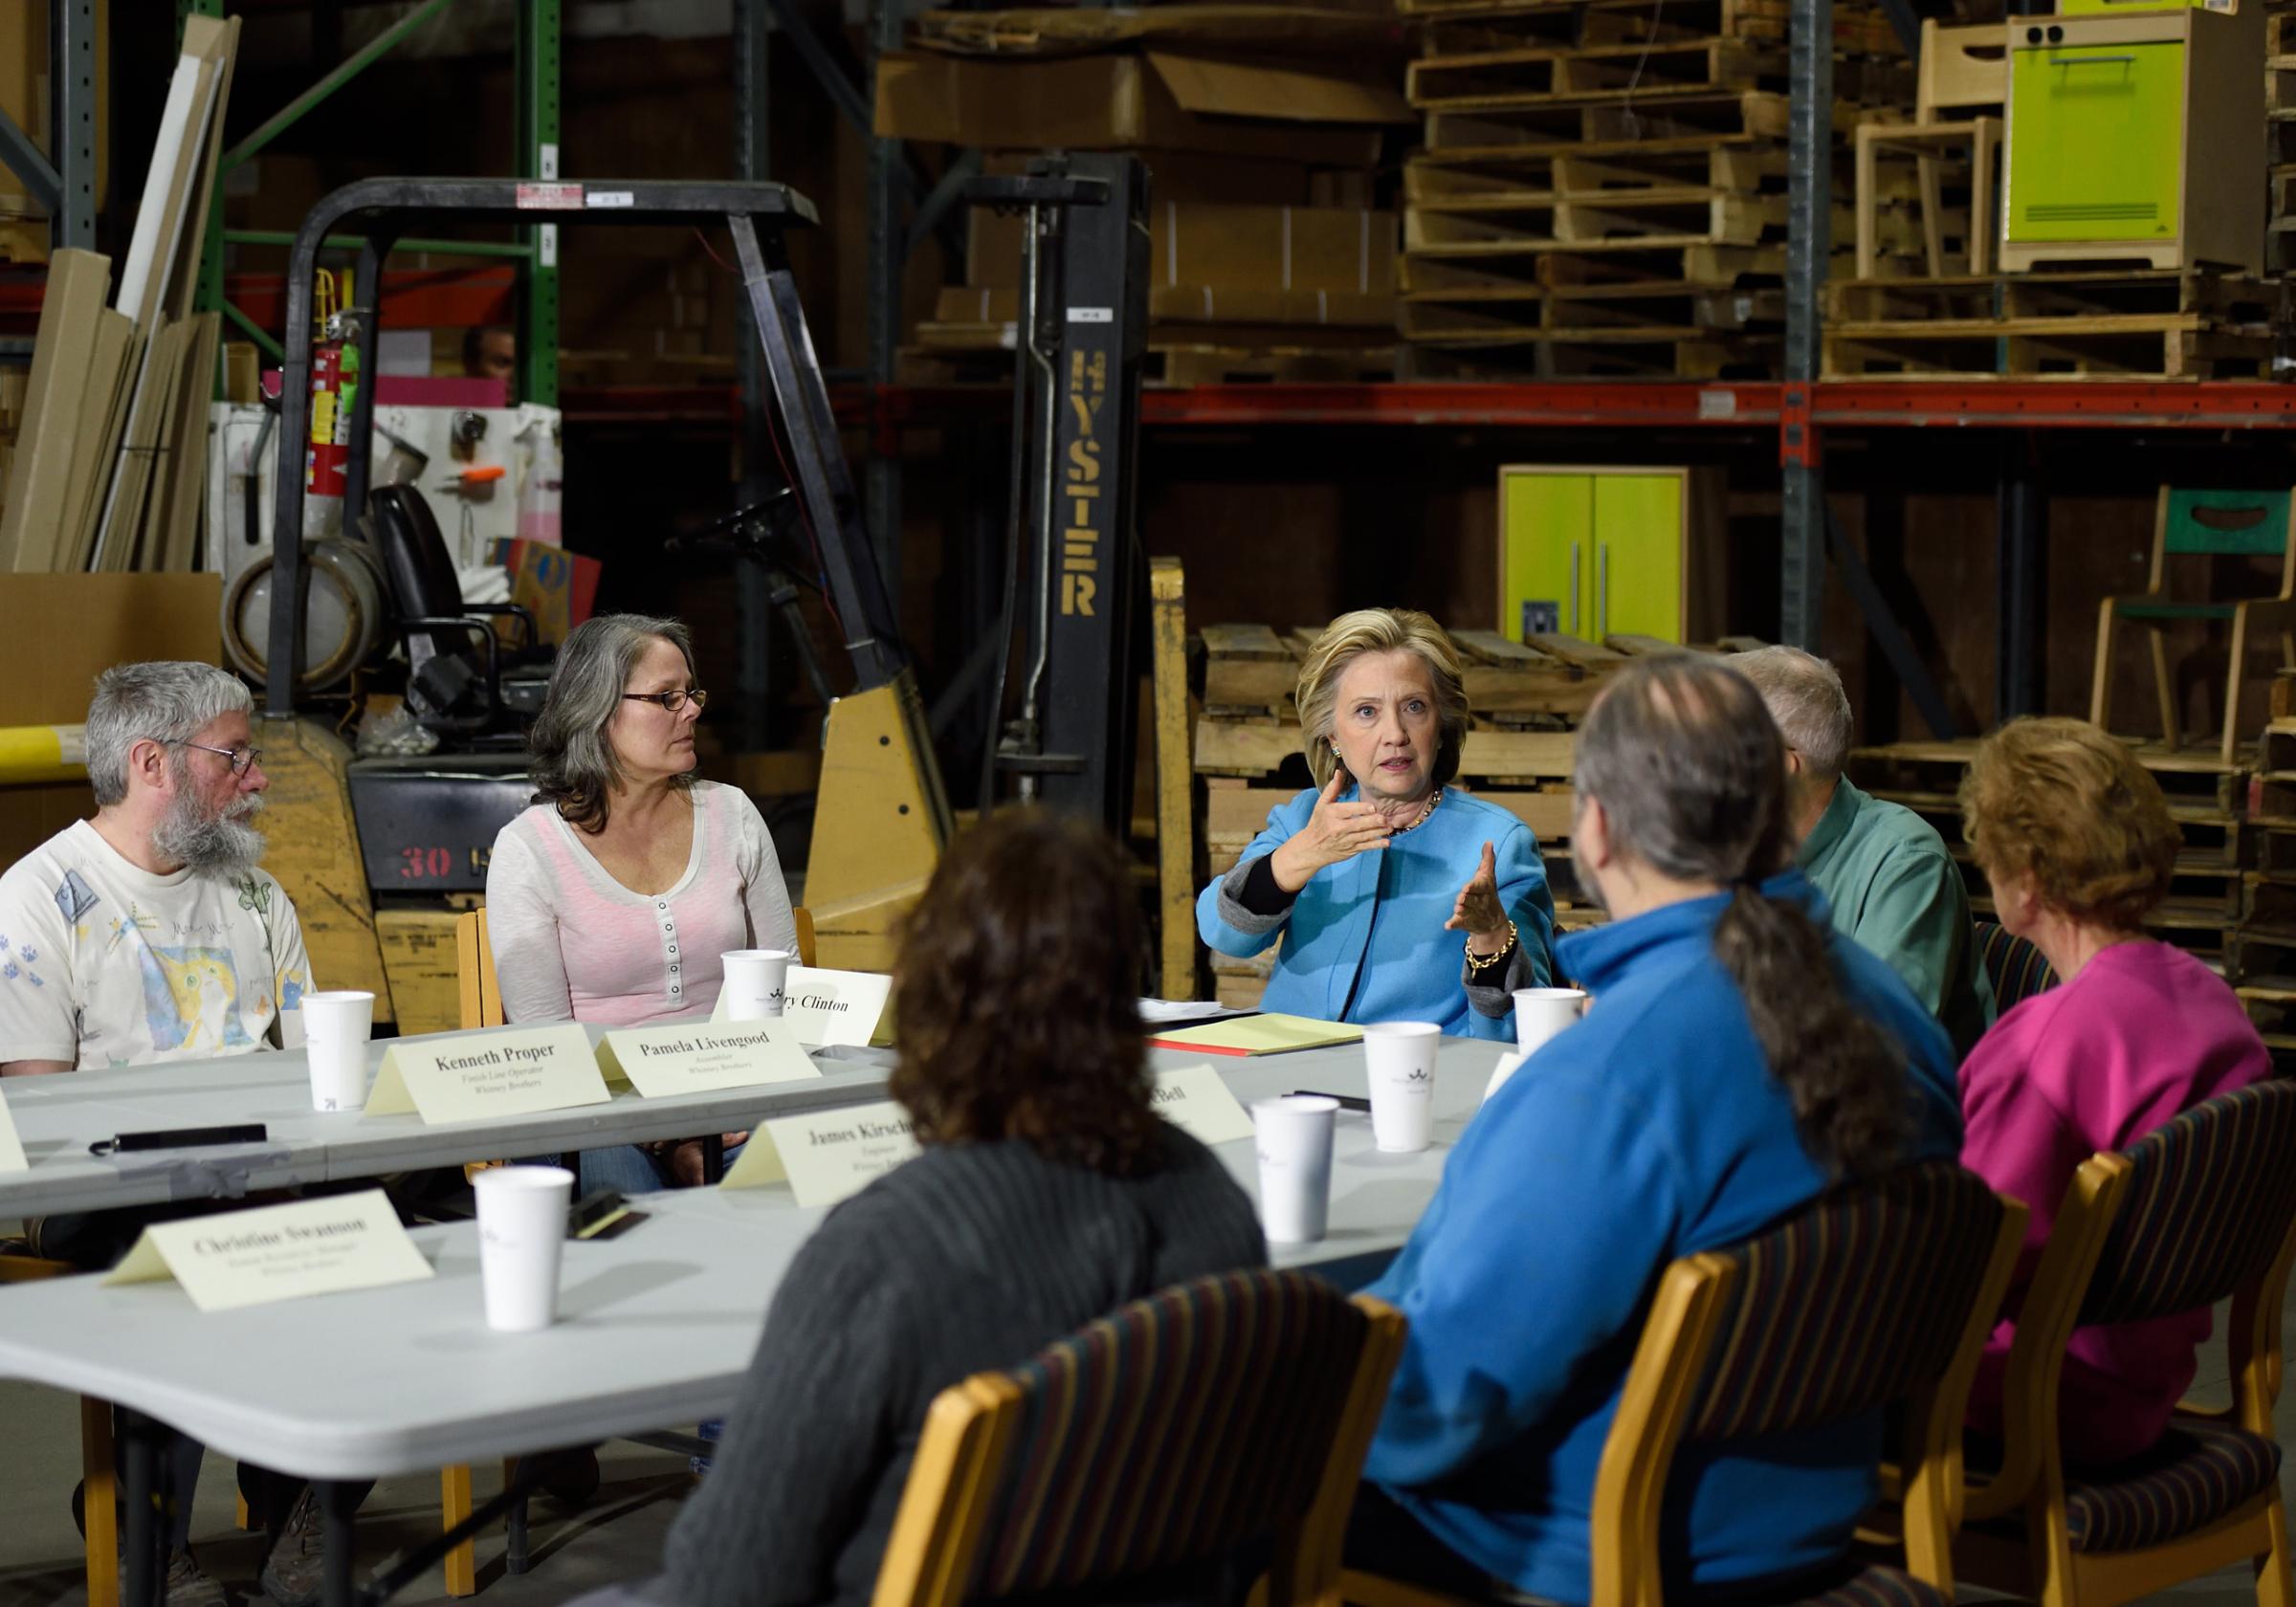 Hillary Clinton participates in a round table discussion with Whitney Brothers management and employees in Keene, N.H. on April 20, 2015.